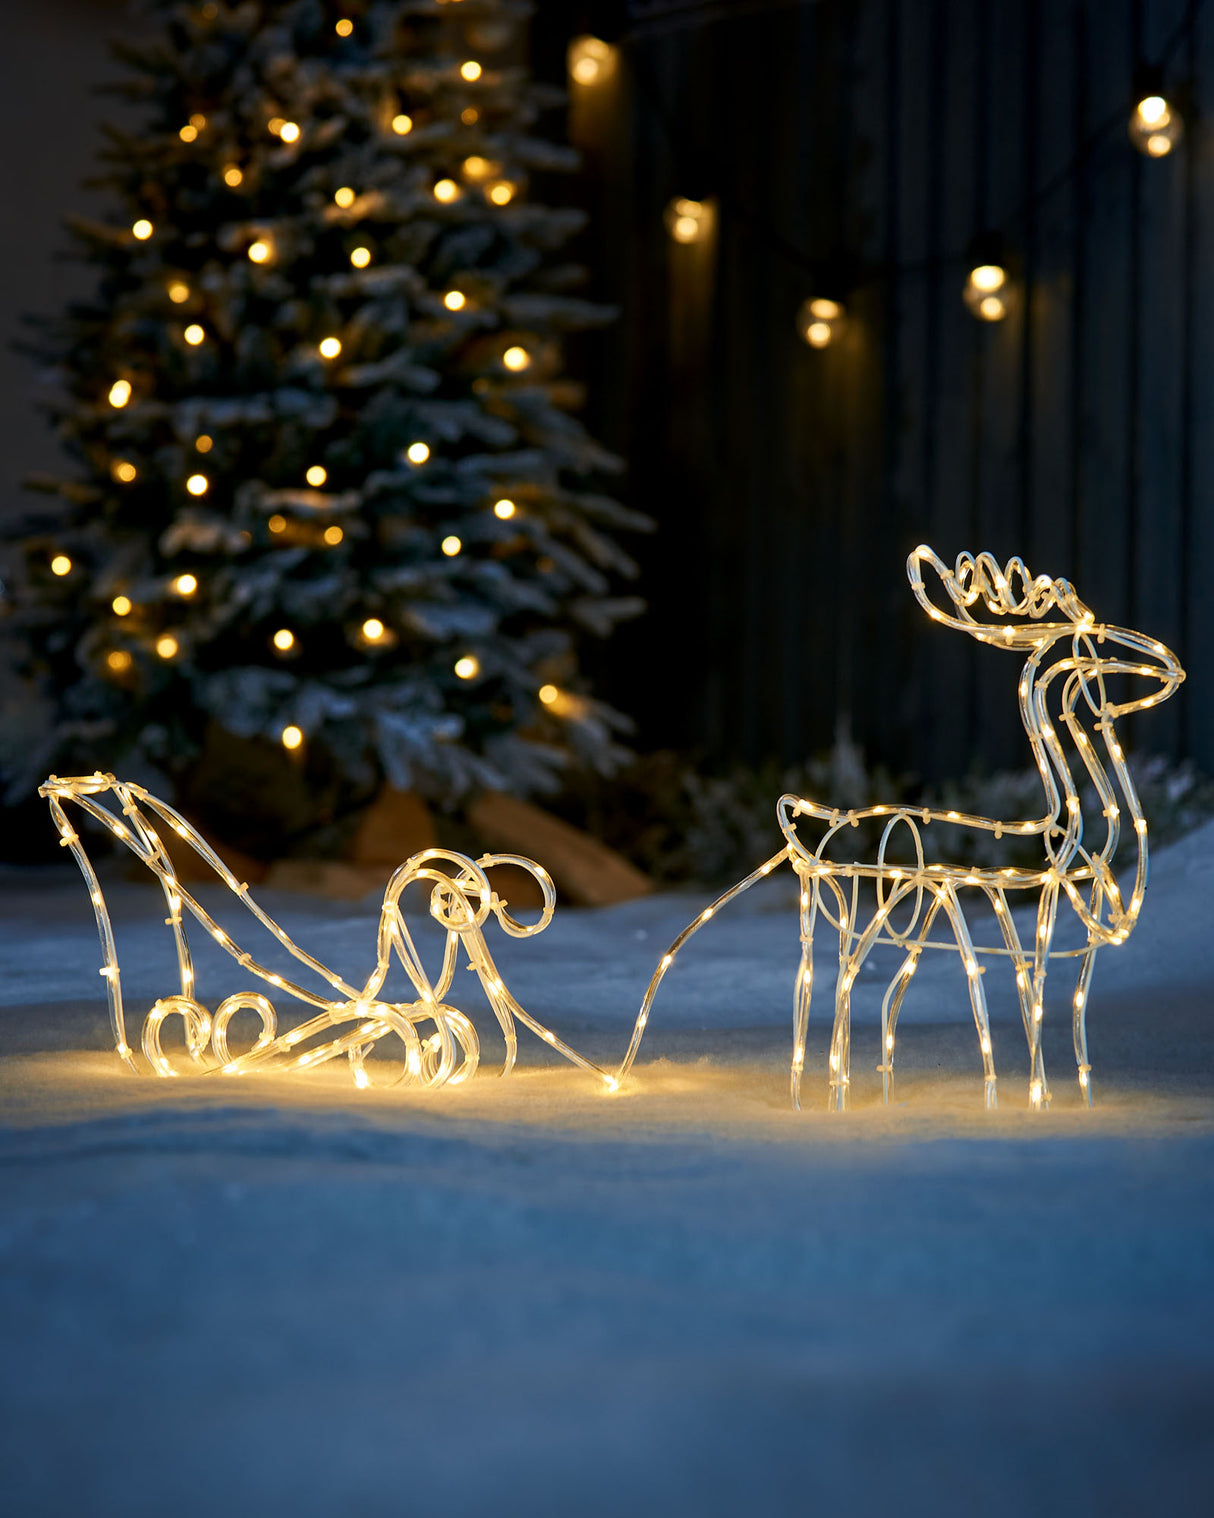 3D Reindeer with Sleigh Rope Light Silhouette, 120 cm